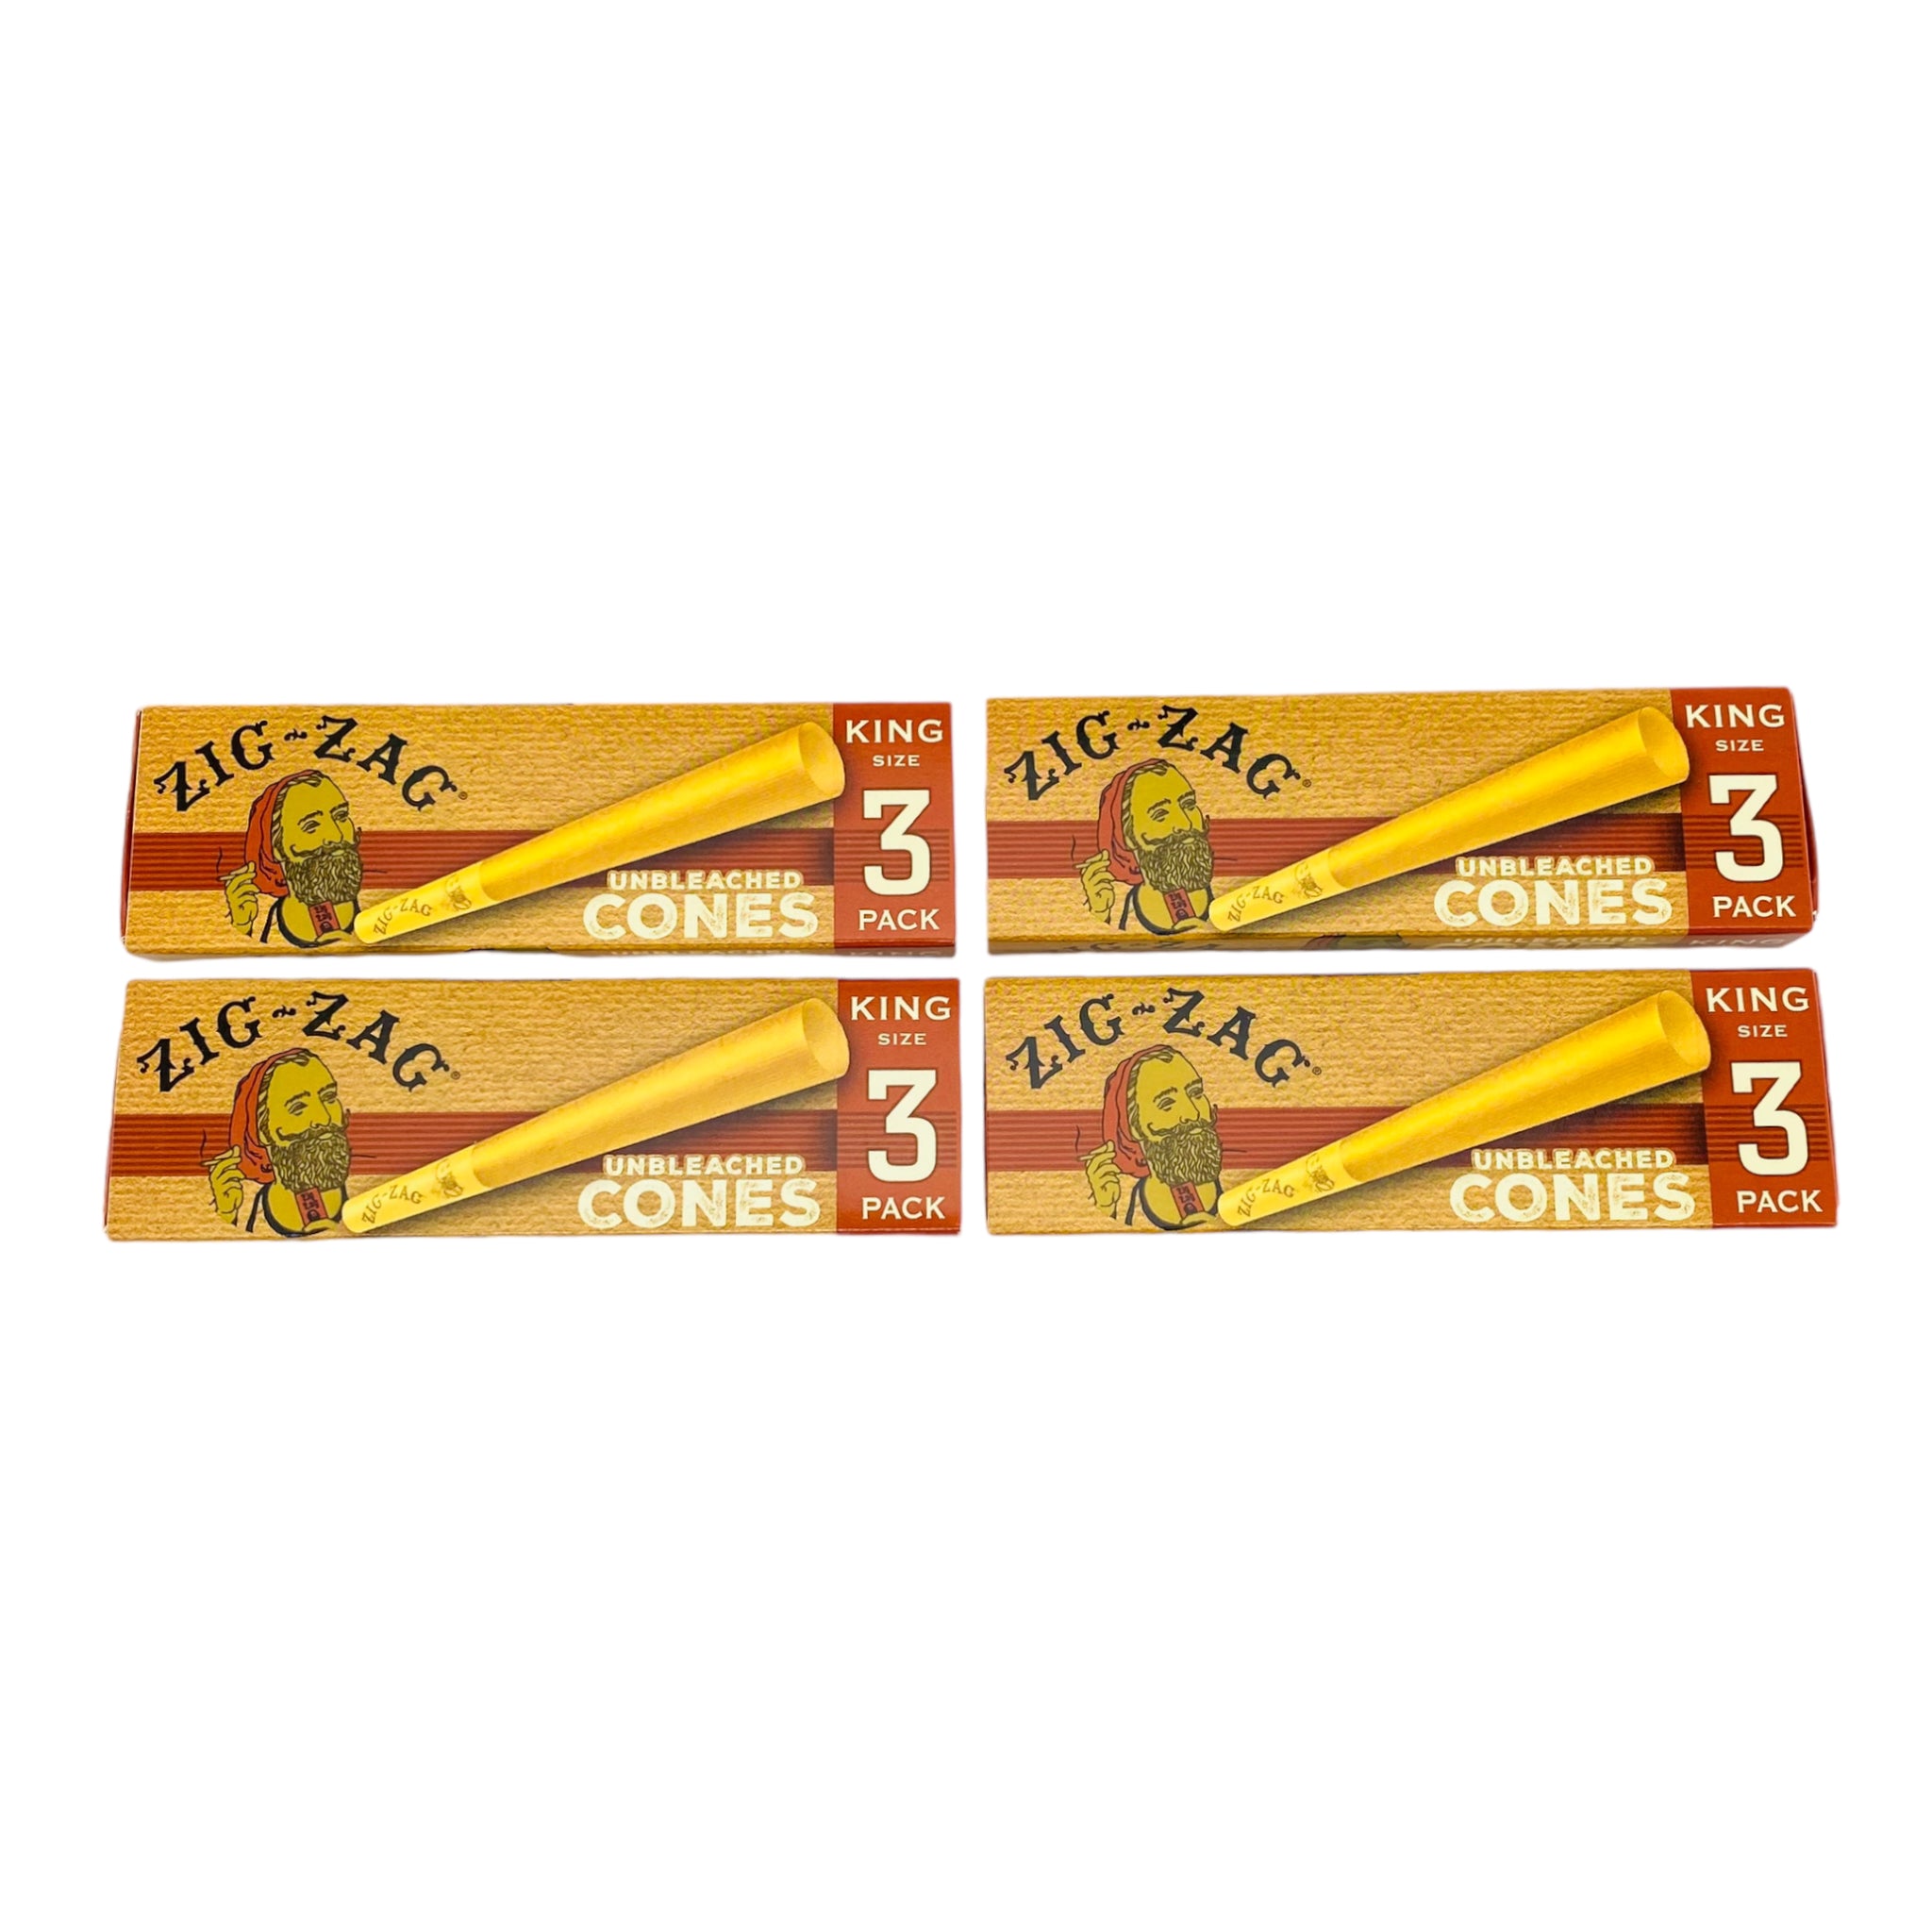 Zig-Zag Unbleached King Size Cones